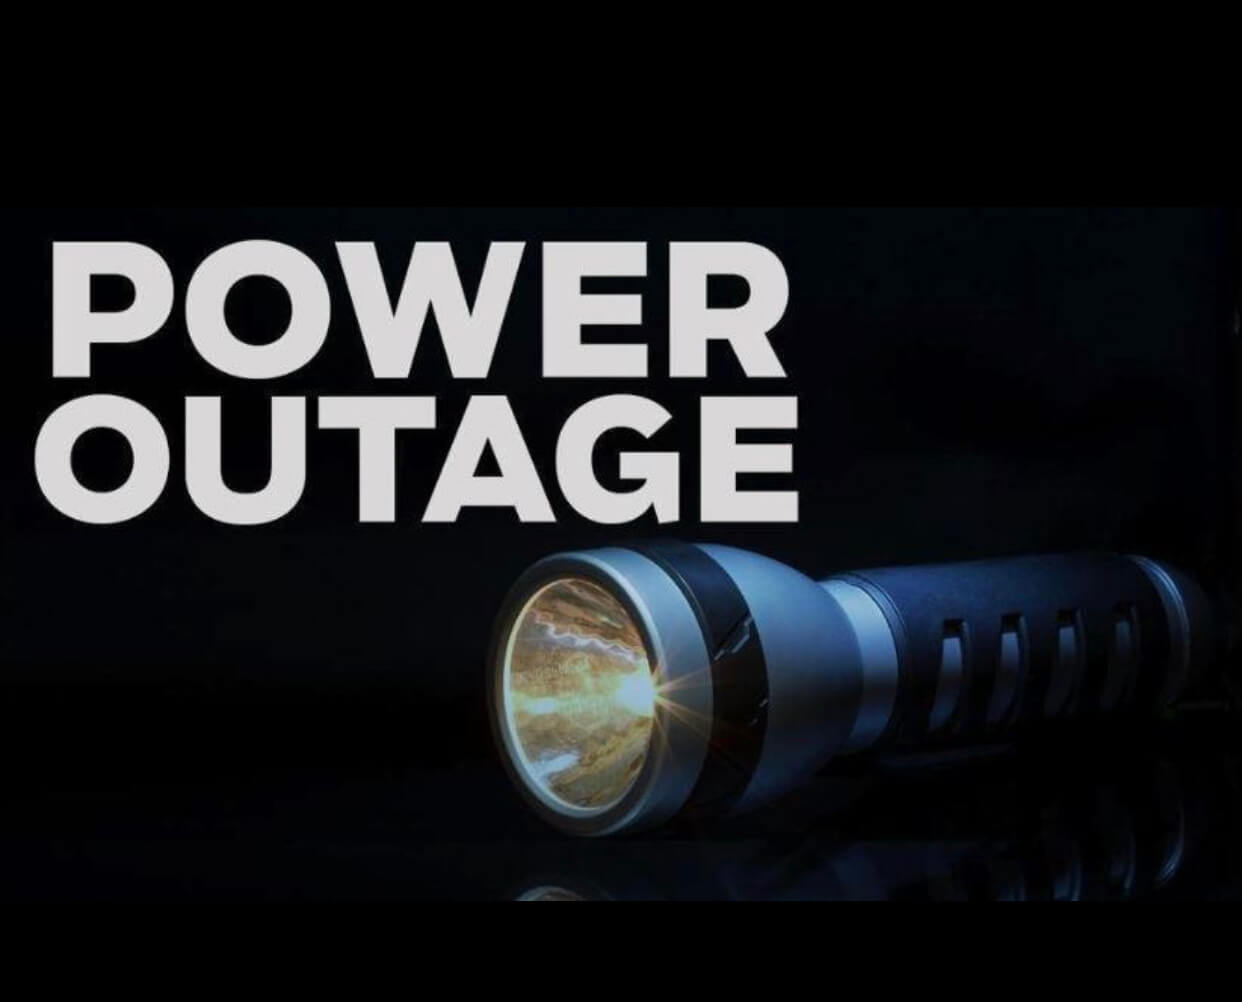 Tippah electric says power outage could last days due to extensive damage